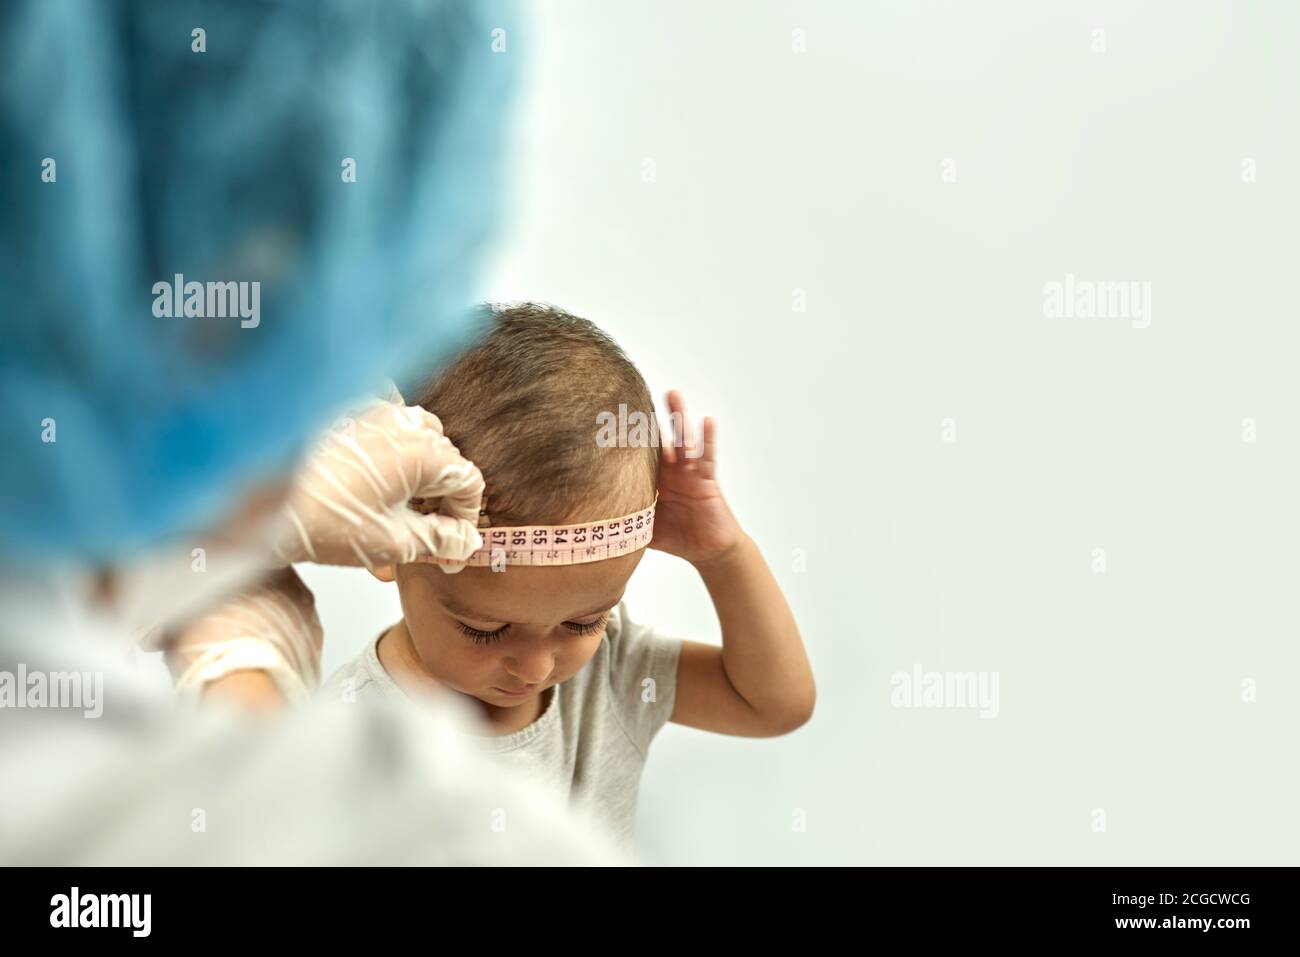 https://c8.alamy.com/comp/2CGCWCG/doctor-measuring-baby-head-circumference-pediatrician-place-measuring-tape-around-your-baby-head-and-record-its-size-well-baby-exam-regularly-2CGCWCG.jpg